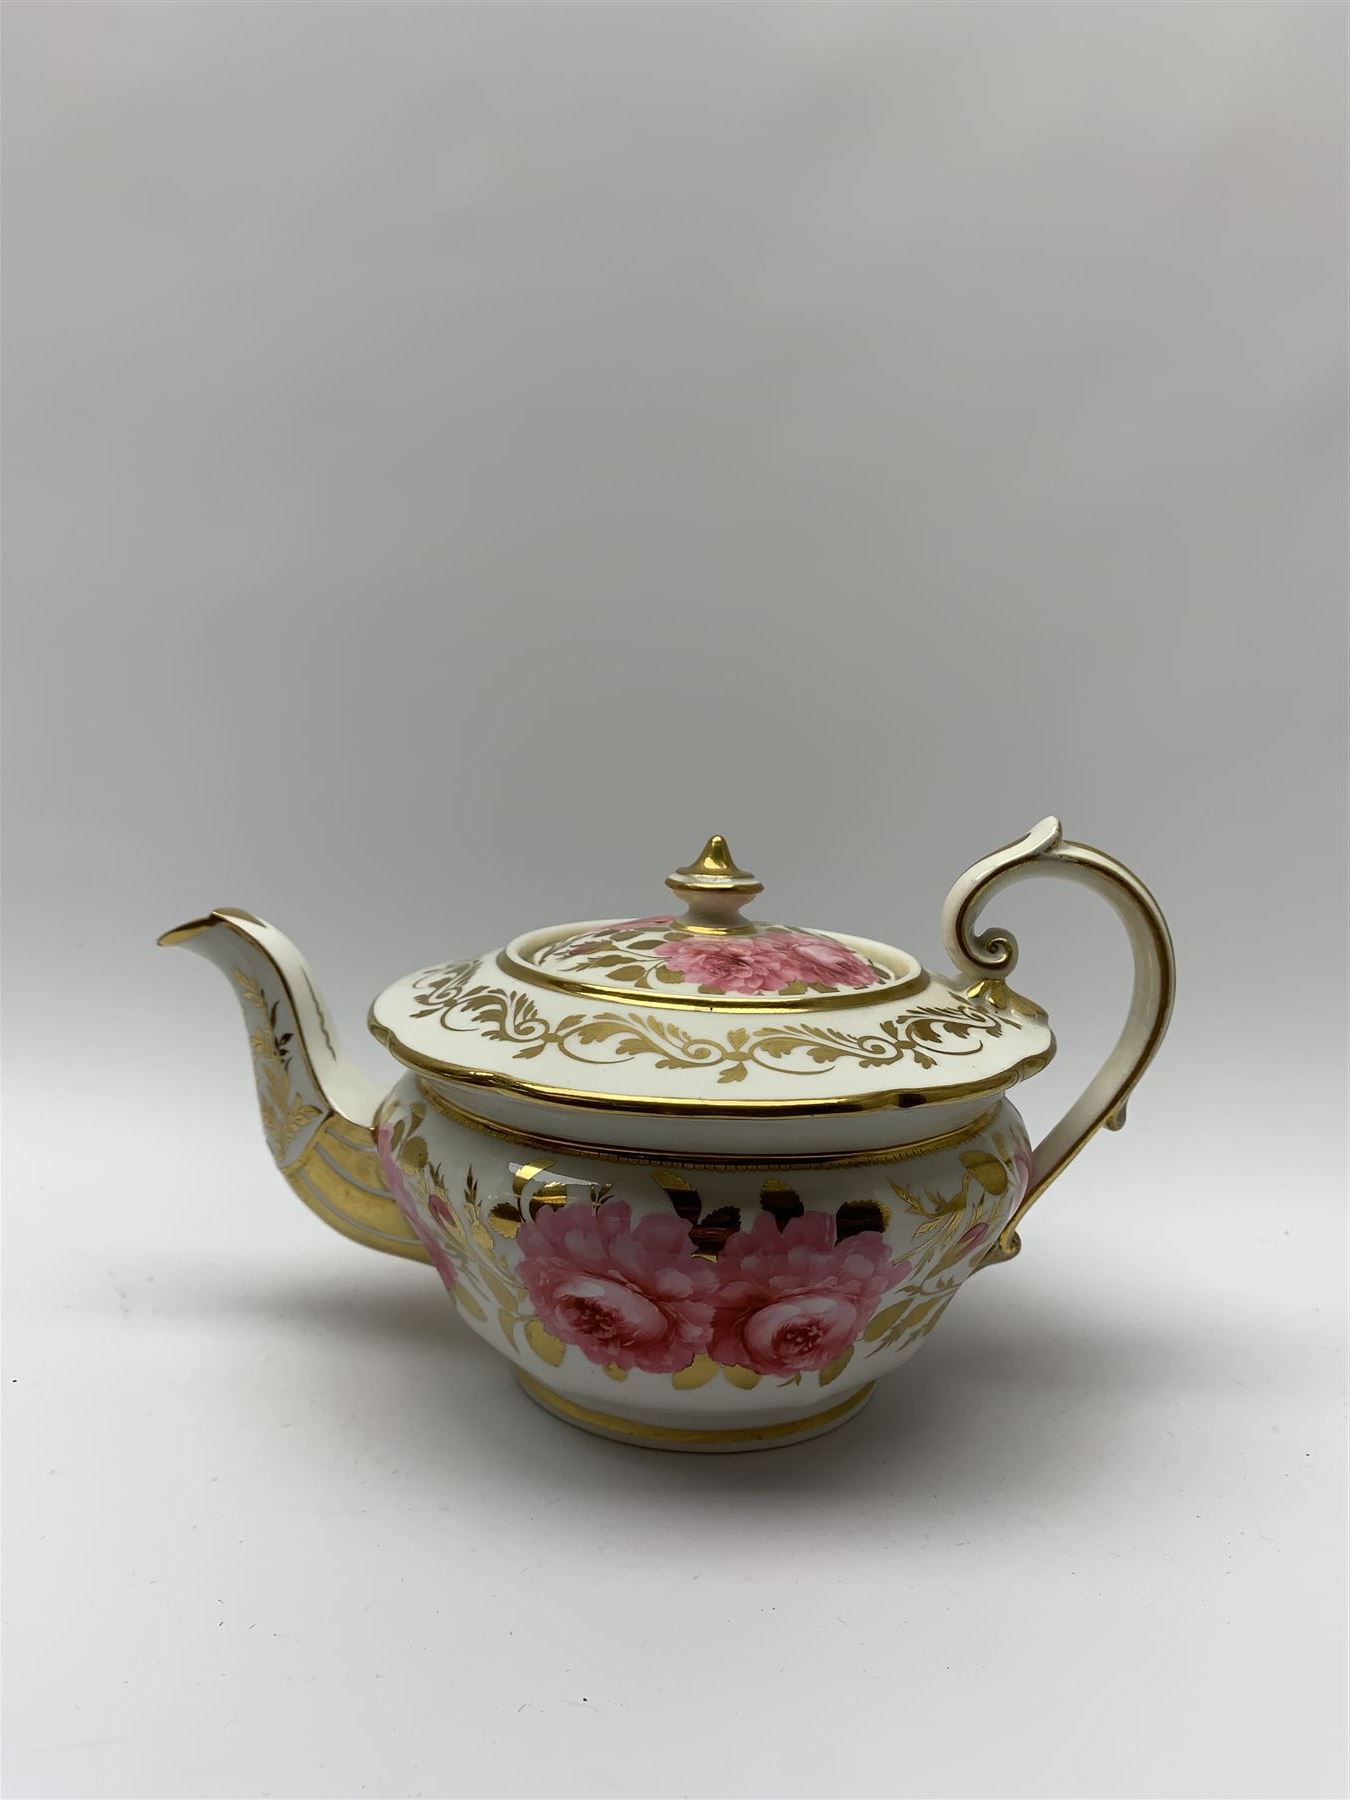 Early 19th century Daniel tea set for one - Image 6 of 9